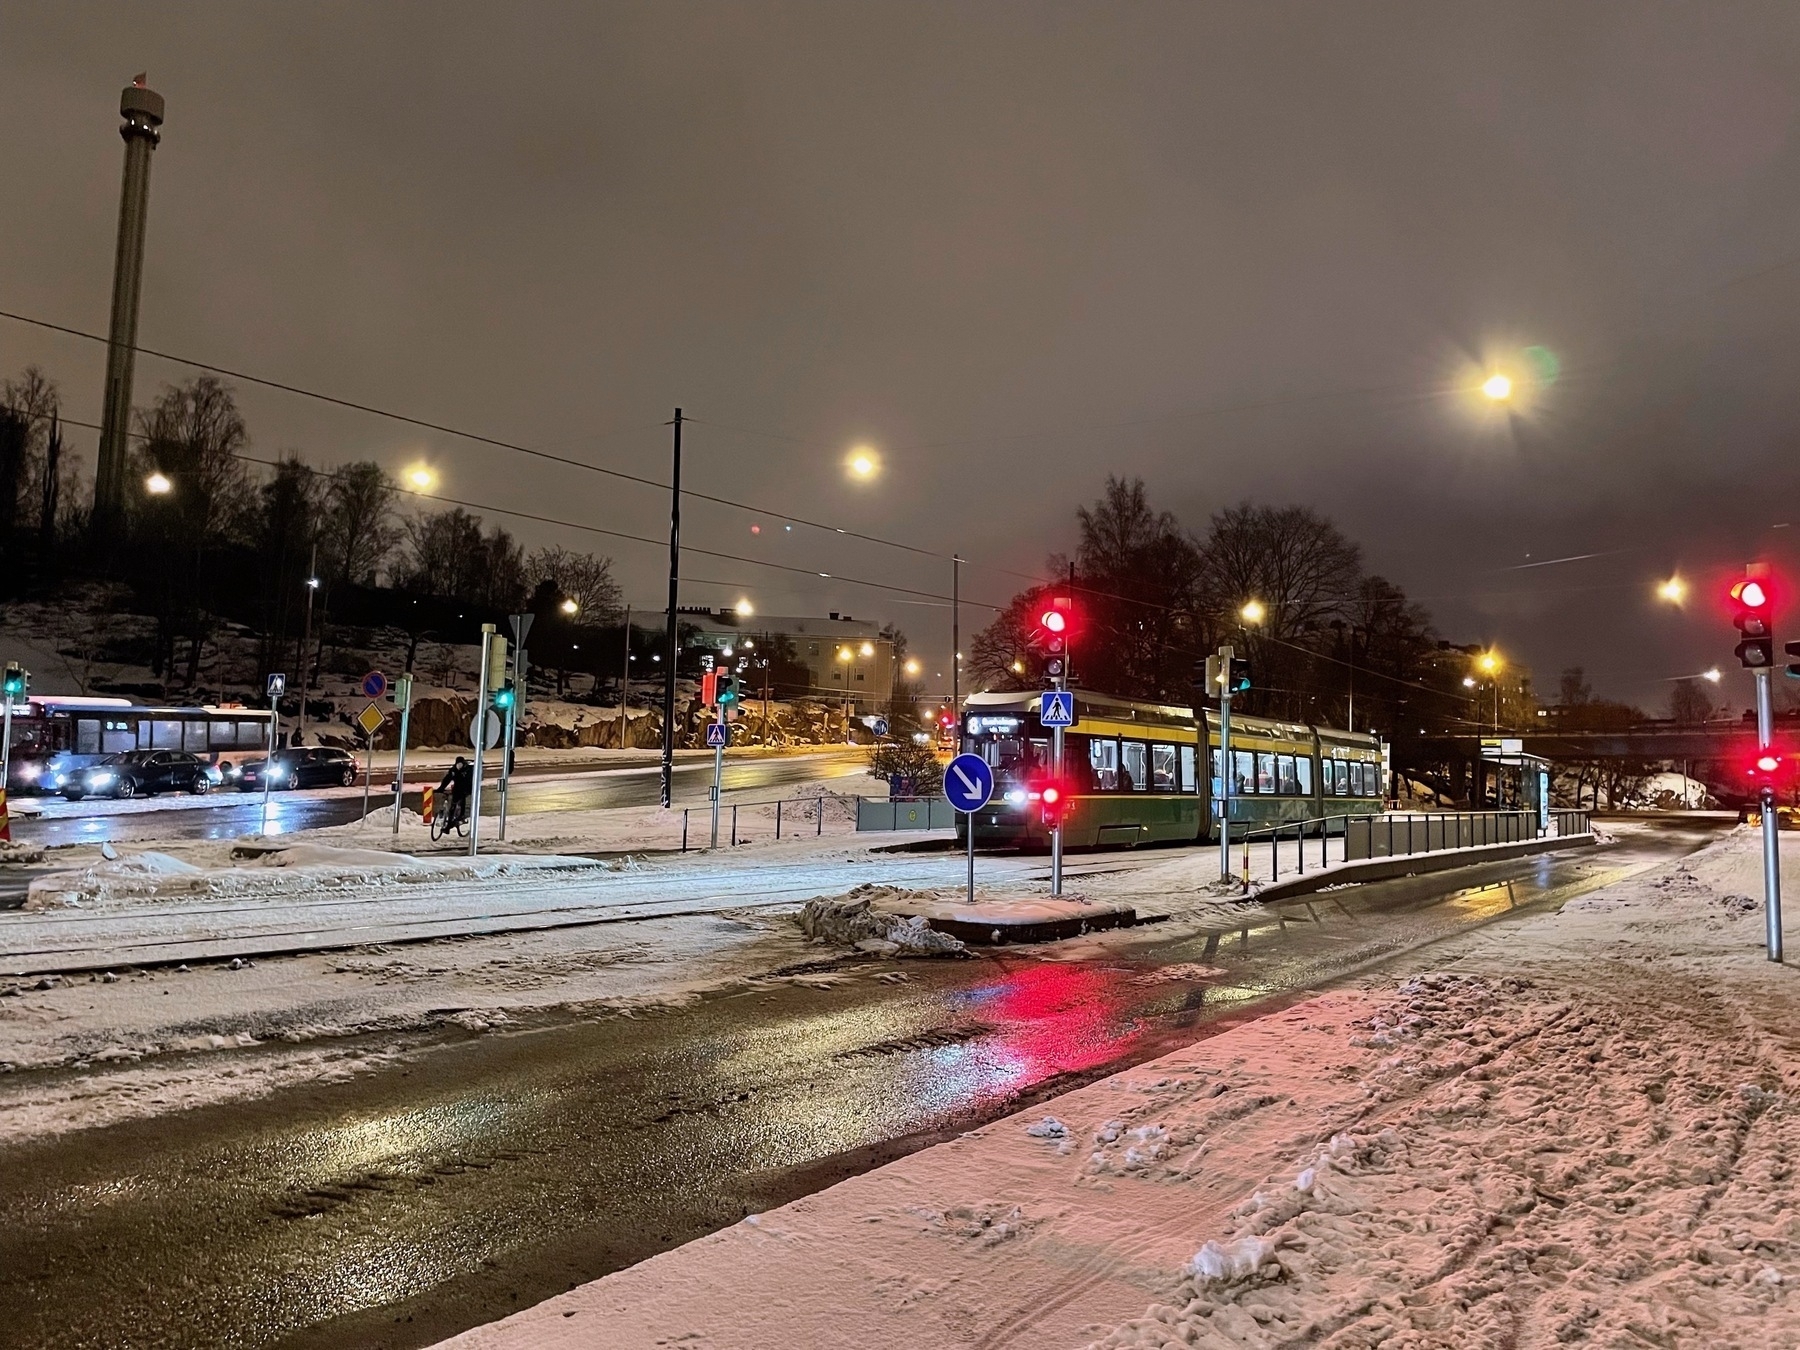 An intersection with several traffic lights, a tram waiting at a red light, some traffic in the background and snow on the sidewalks.